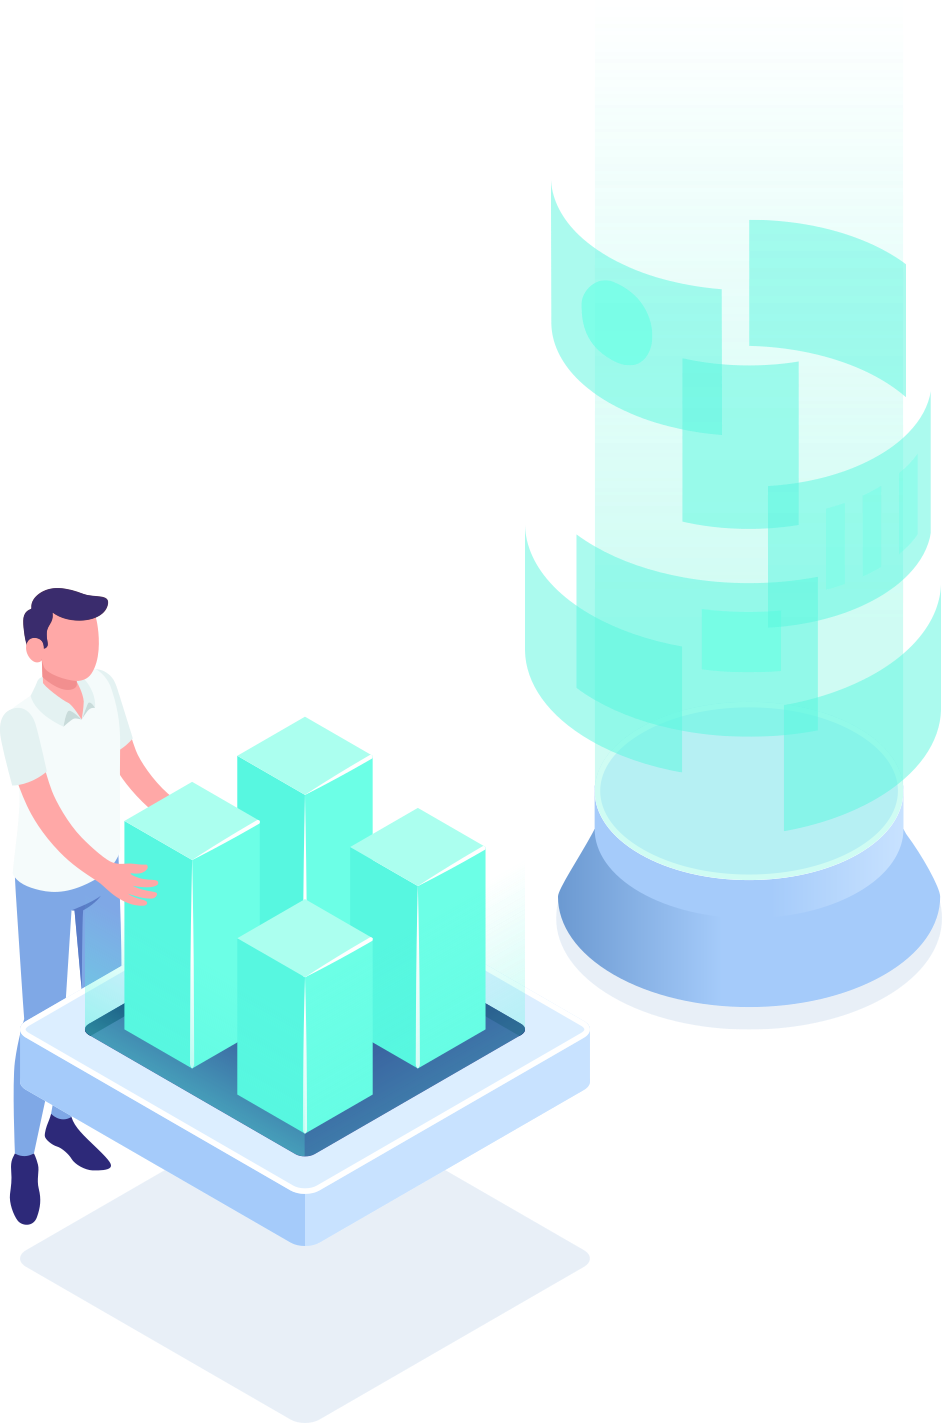 A product manager isometric illustration.